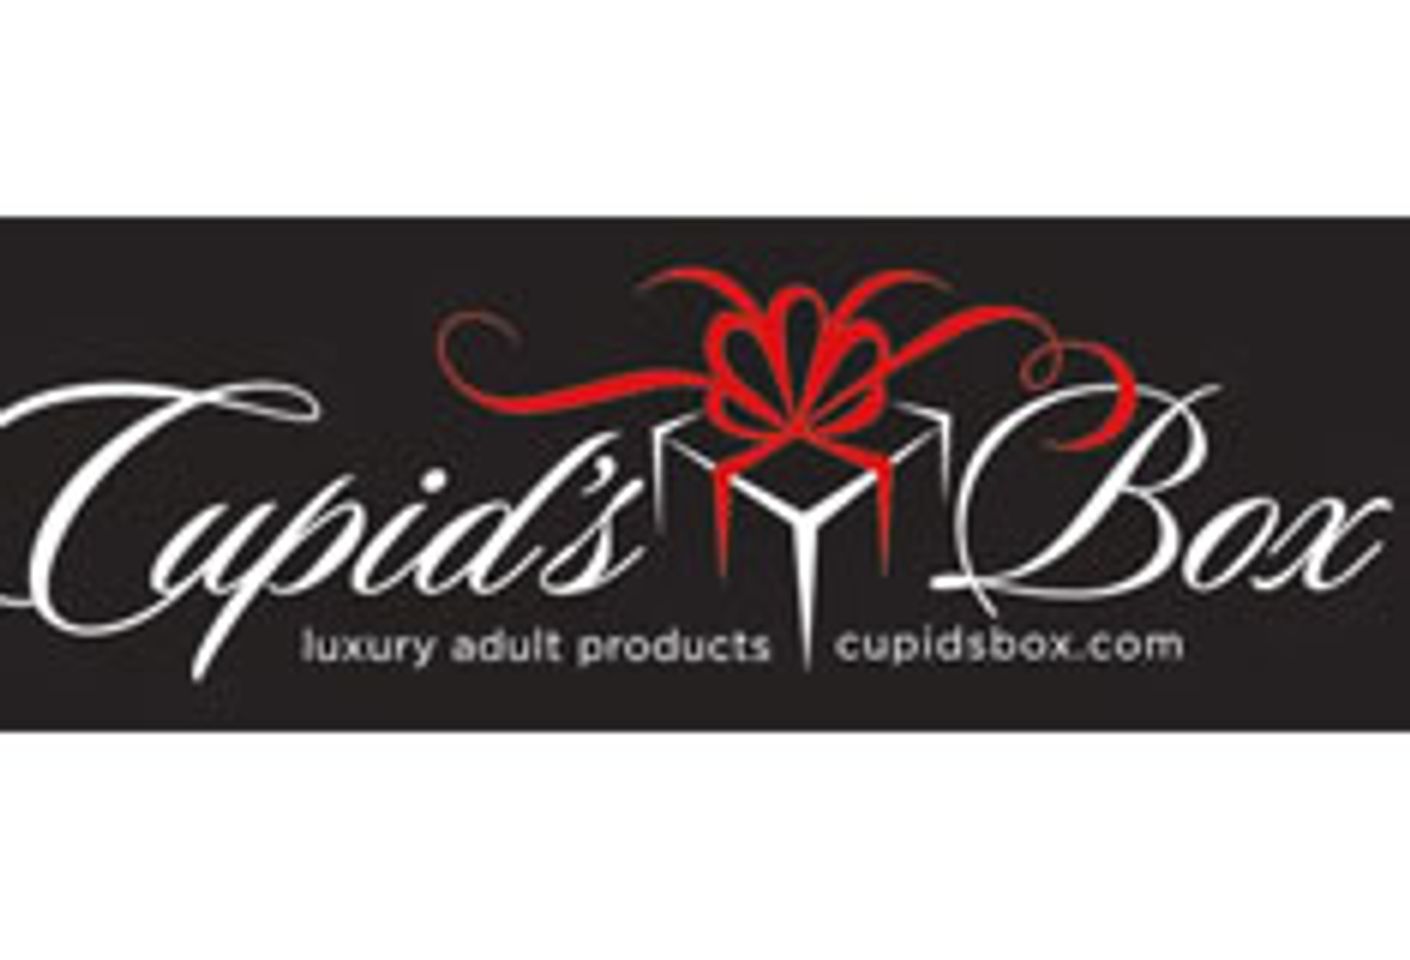 CupidsBox.com Helps Clients Get In, Get Out, Get Off